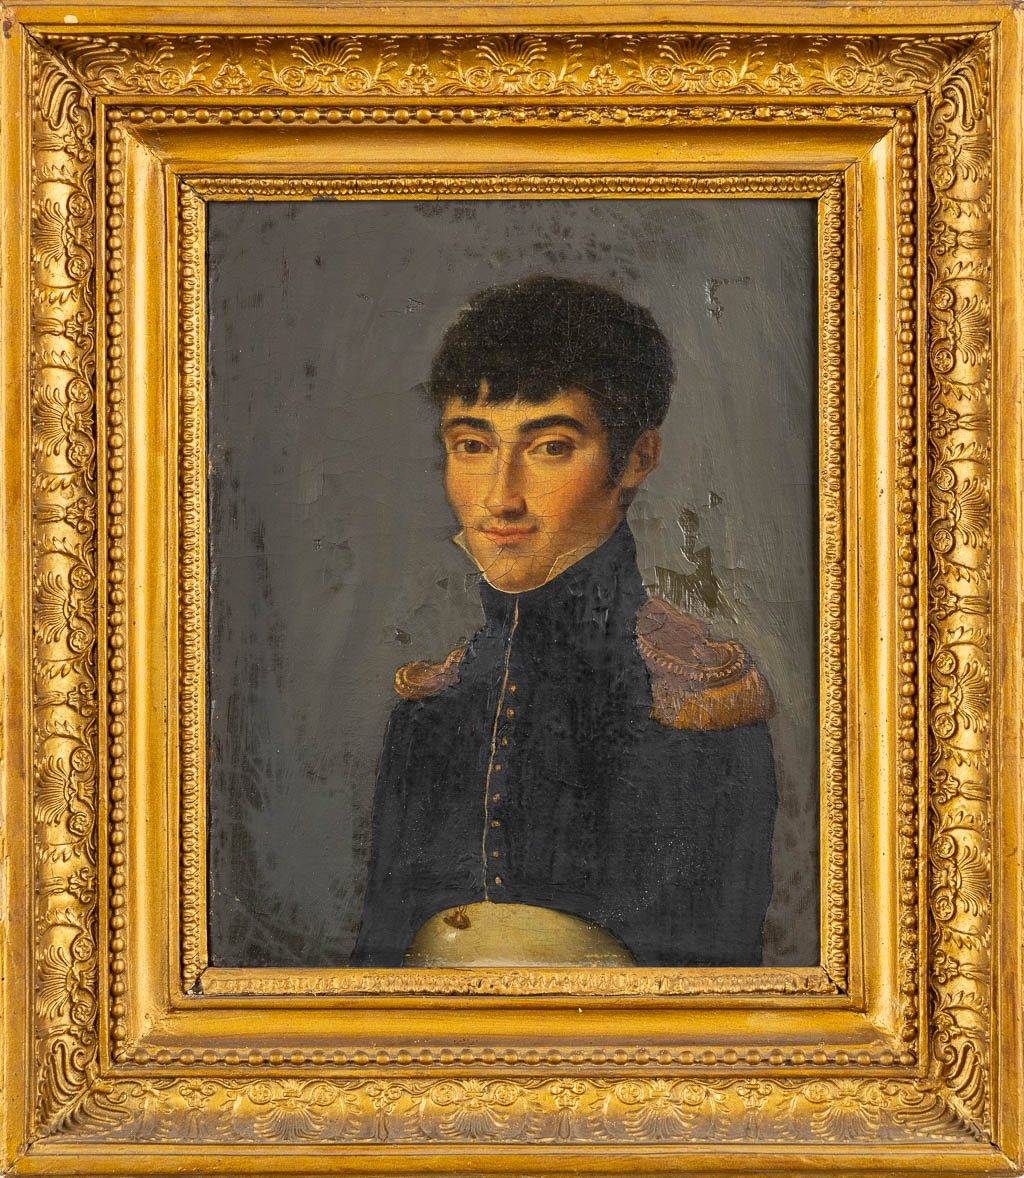 Portrait of a Young Soldier, oil on canvas. Probably Empire period. (W:22 x H:27 cm)